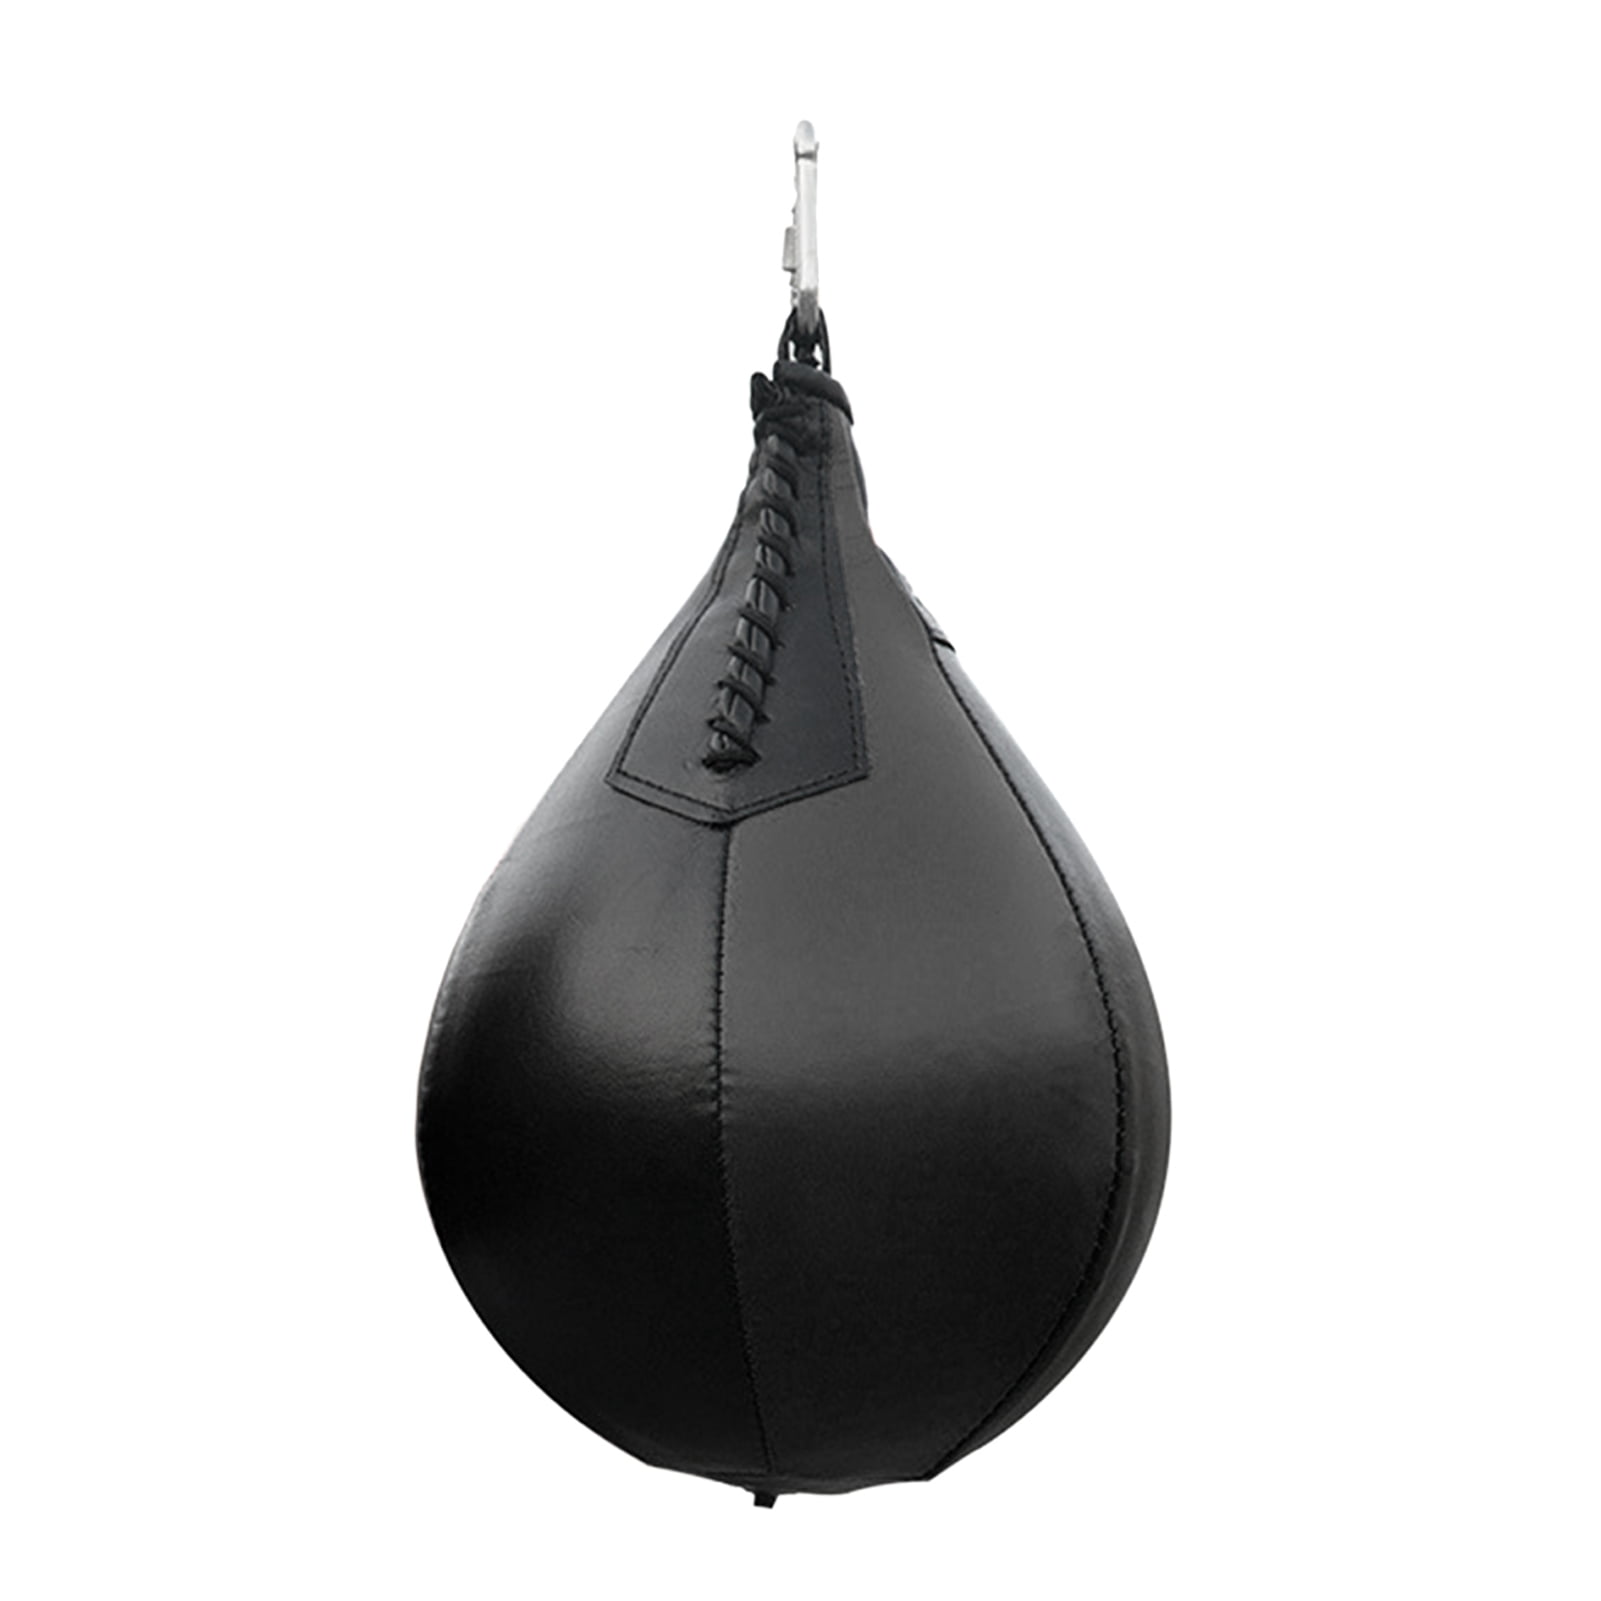 Leather Speed Ball Training Punching Speed Bag Boxing MMA Pear Punch Bag 